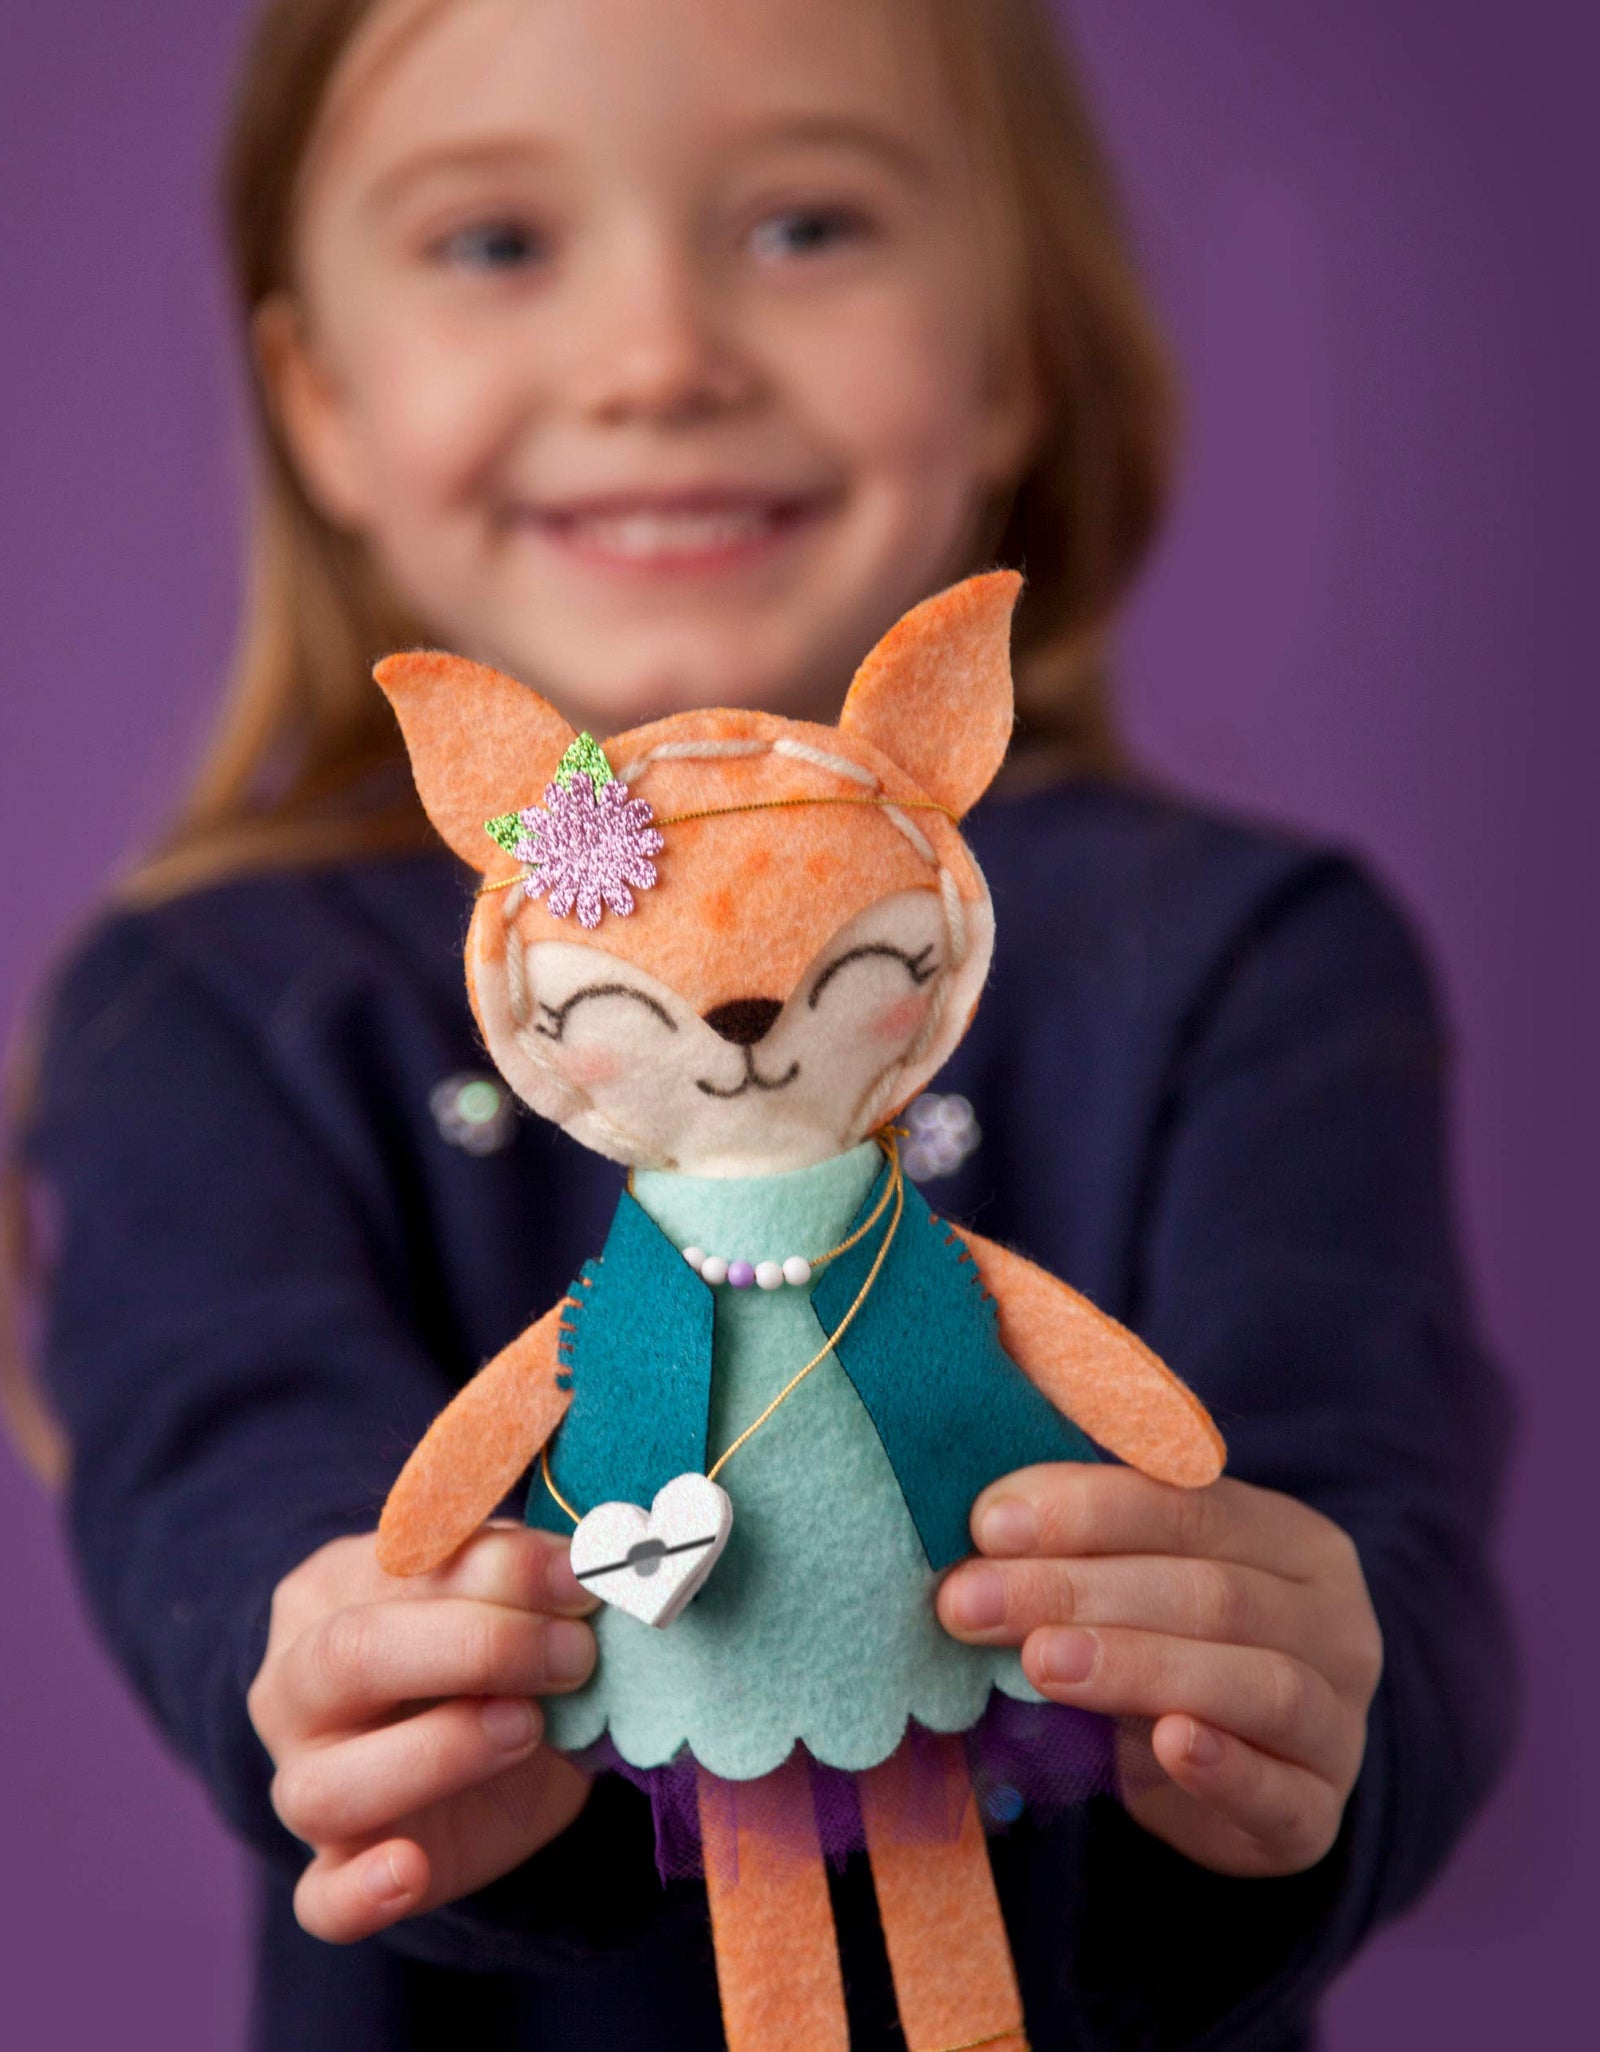 Craft-tastic – Make a Fox Friend Craft Kit – Learn to Make 1 Easy-to-Sew Stuffie with Clothes & Accessories